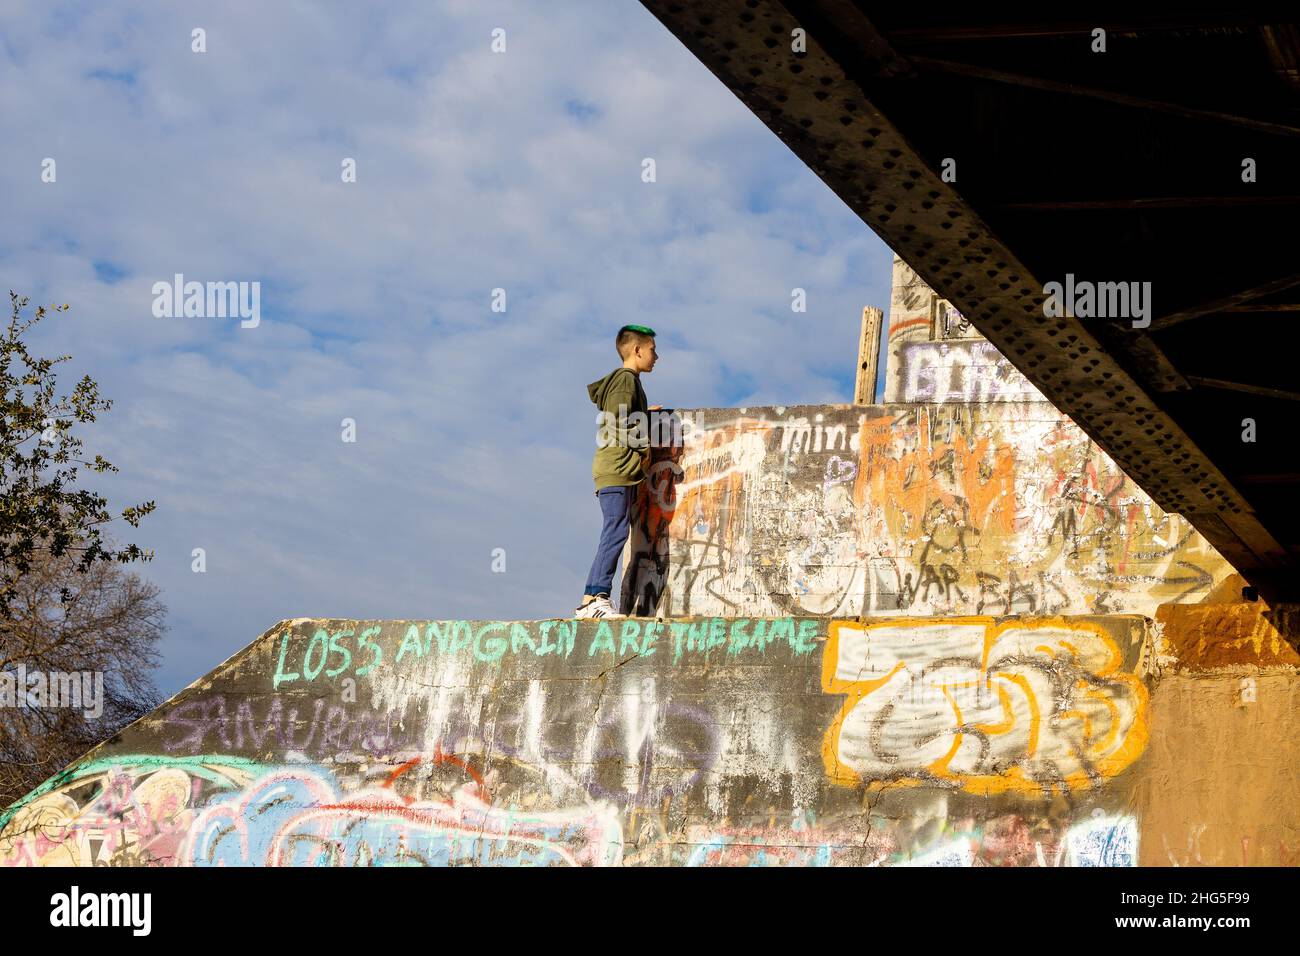 Boy on top of railroad pillars platforms next to a train bridge with graffiti and blue sky and clouds Stock Photo